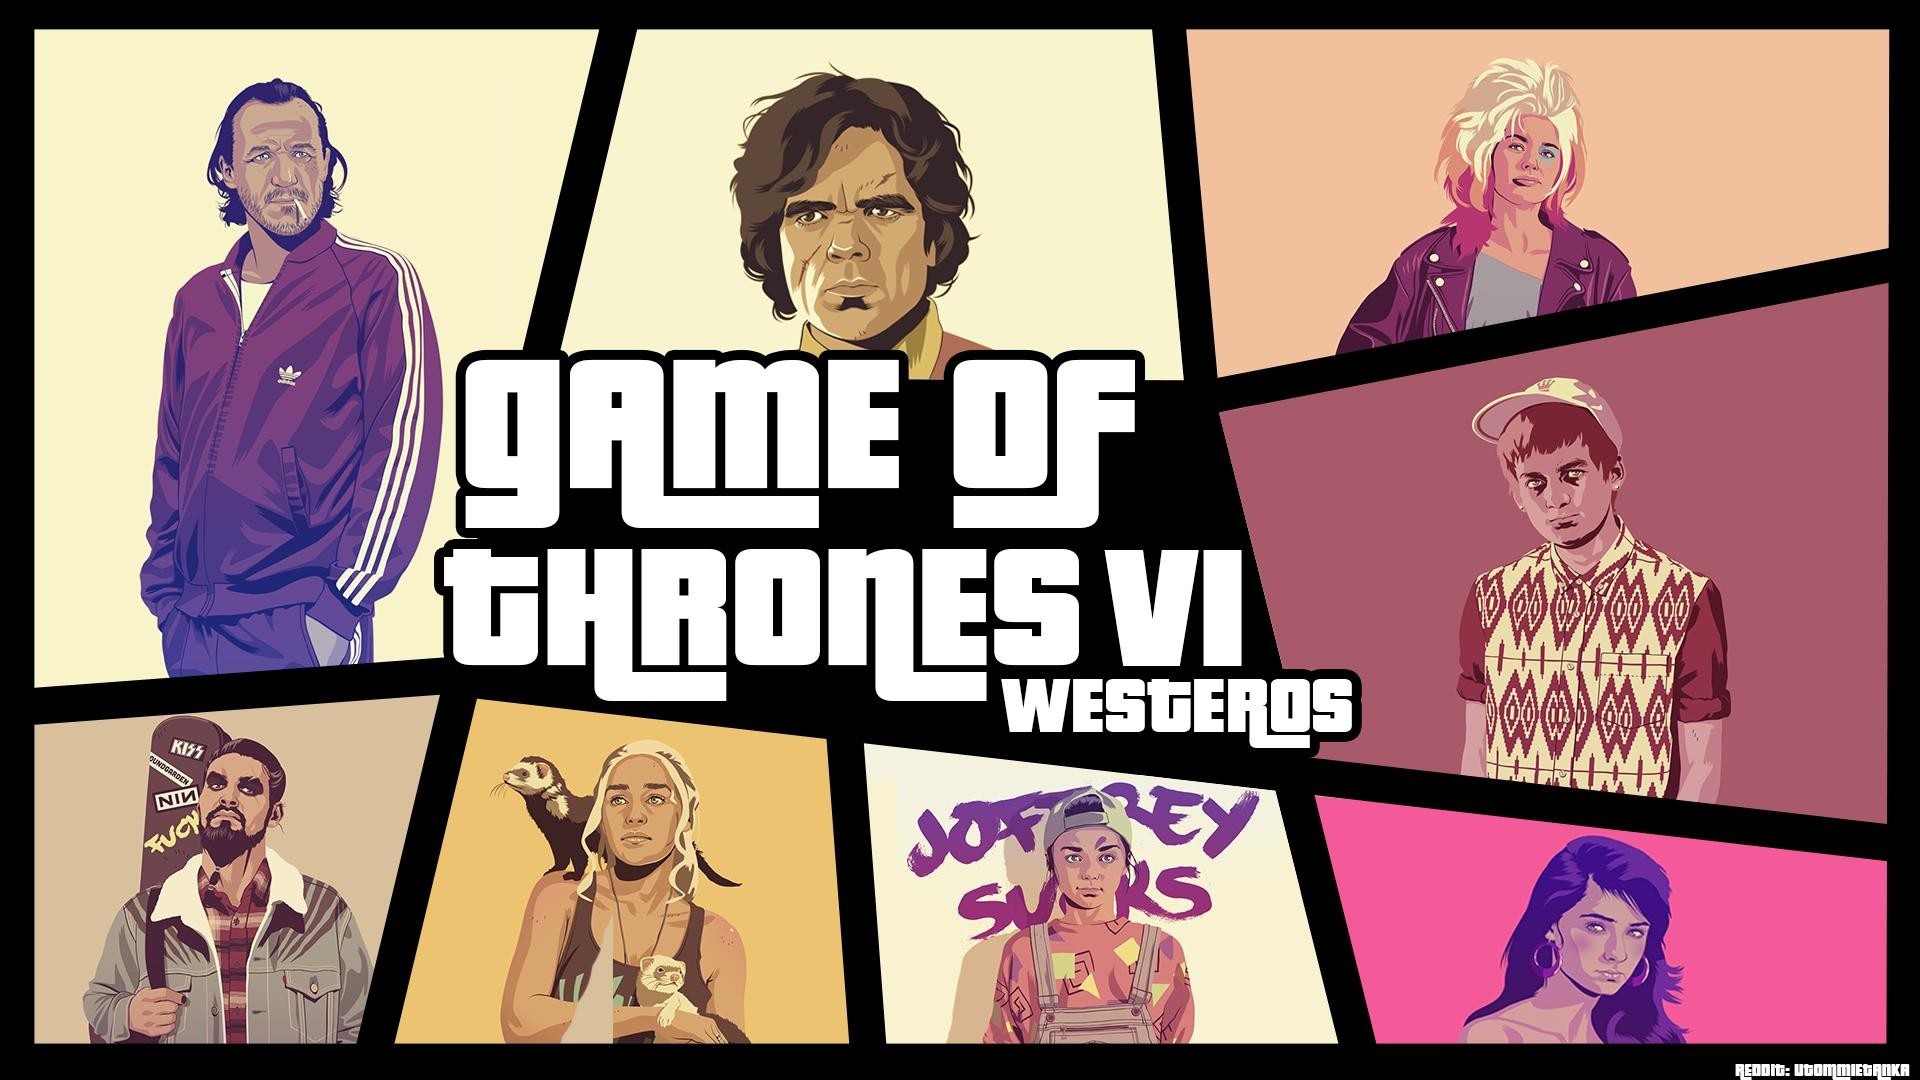 General 1920x1080 Game of Thrones Grand Theft Auto IV Grand Theft Auto crossover parody mix up video games TV series collage